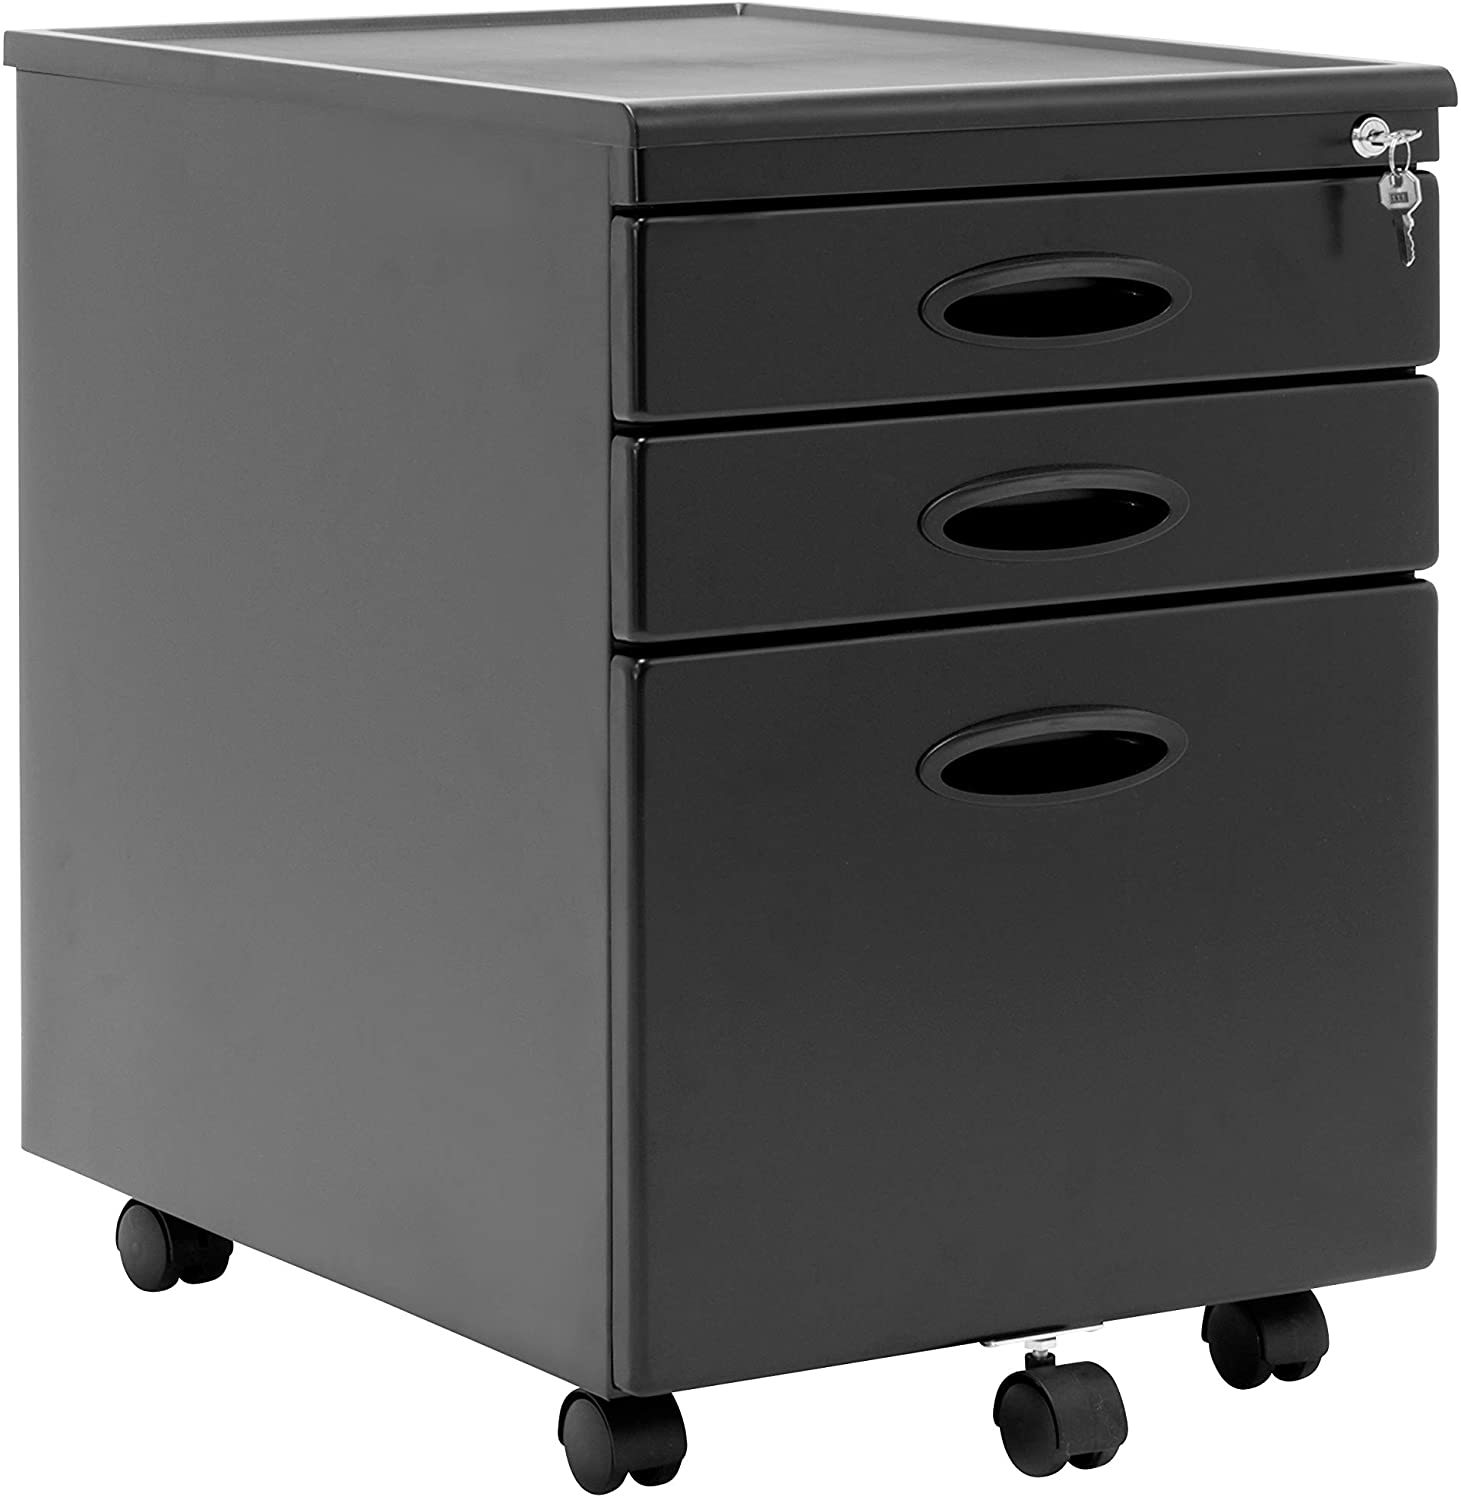 Calico Designs Metal Full Extension, Locking, 3-Drawer Mobile File Cabinet Assembled (Except Casters) for Legal or Letter Files with Supply Organizer Tray in Black